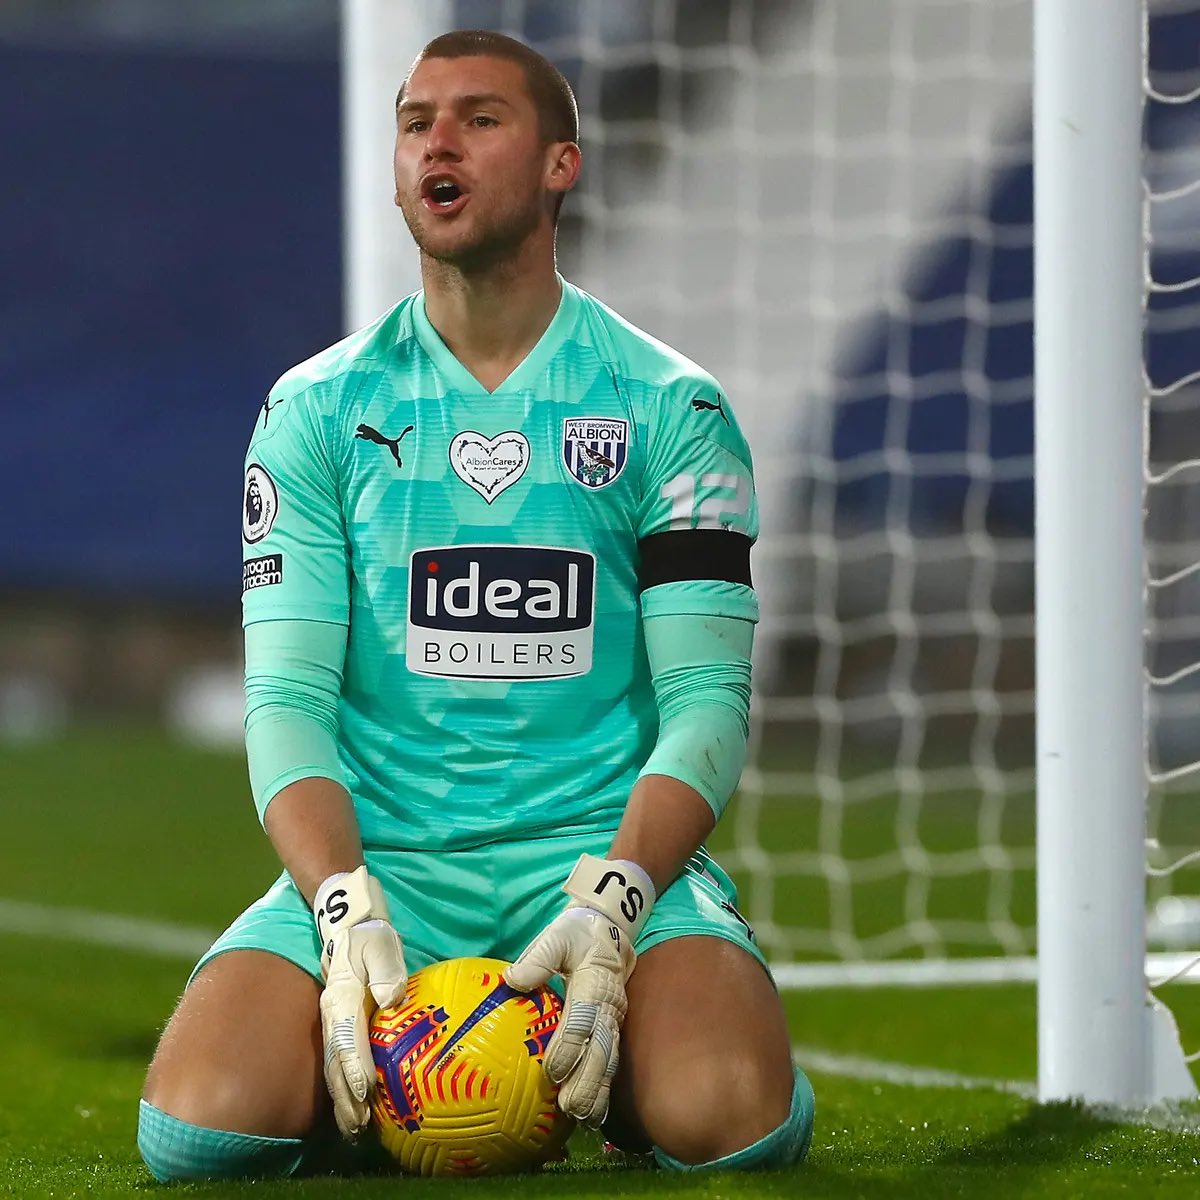 18th Place: West BromGK: Sam Johnstone, proven a good PL shot stopper, WBA best keeper.DF: Semi Ajayi, WBA best defender, his long legs & strength would cause an issue for attackers.MF: Connor Gallagher, a good all rounder with energy & quality would do a good job imo.